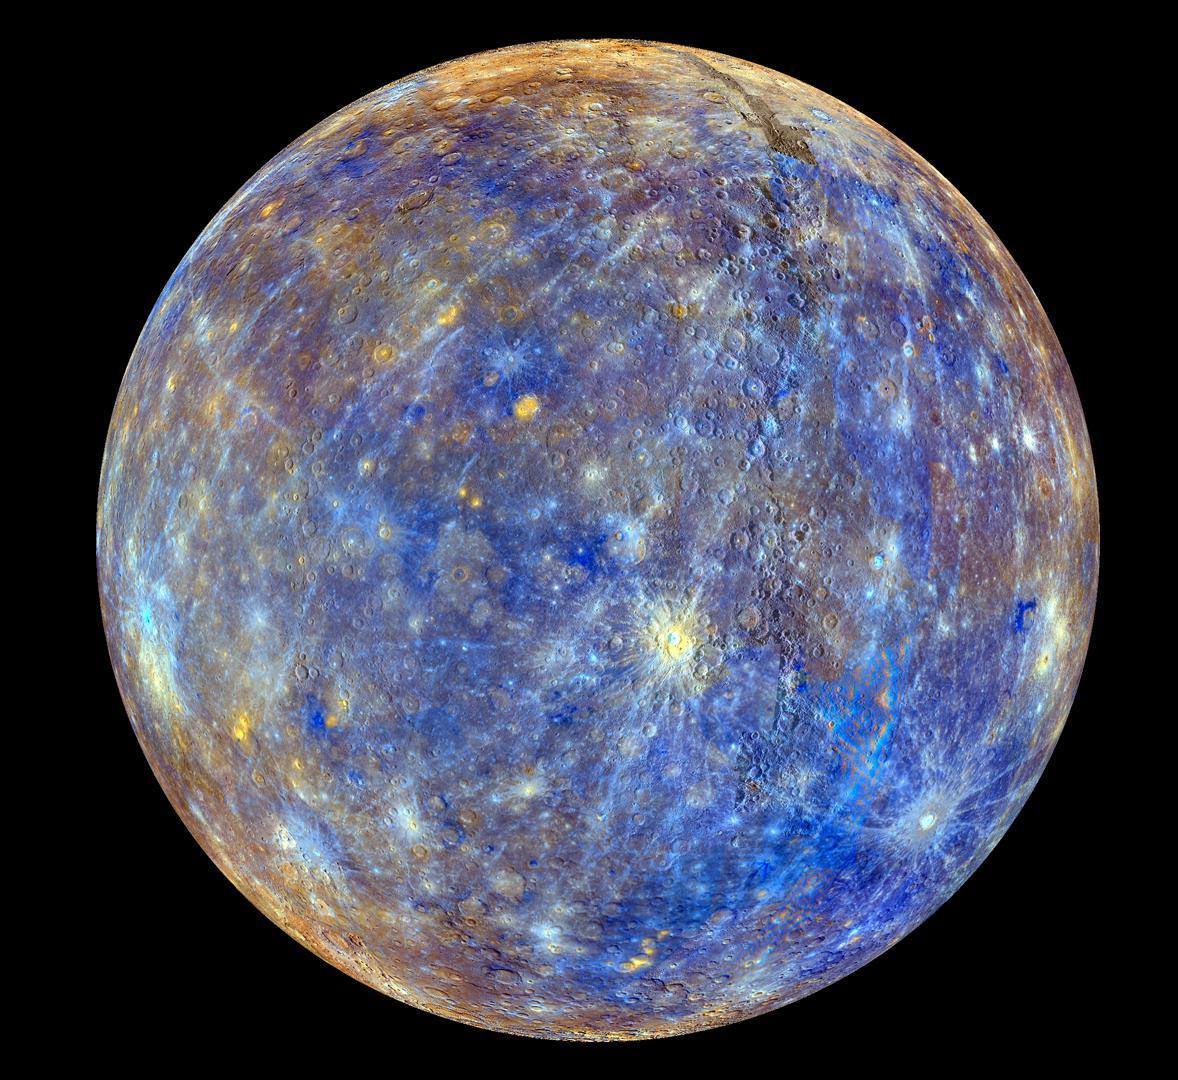   Apparently this is &ldquo;The clearest photo of Mercury ever taken.&rdquo;